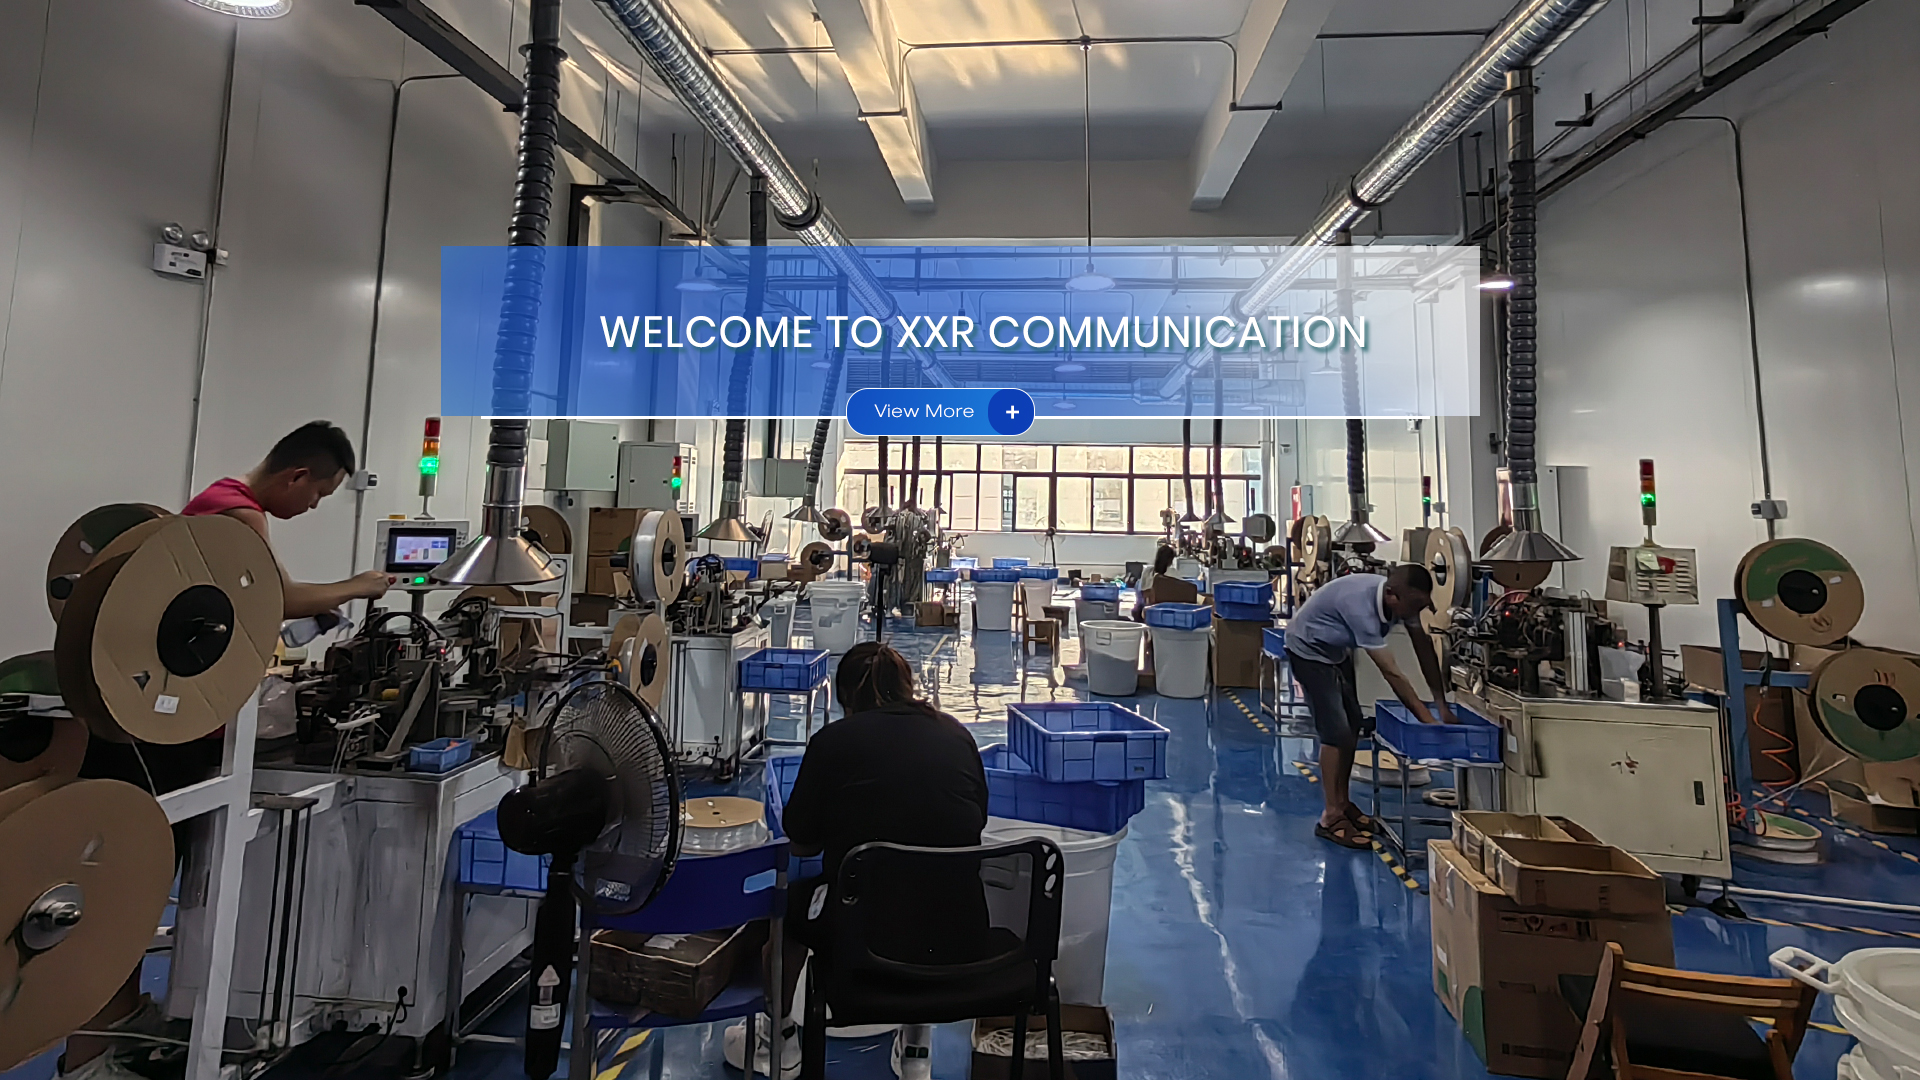 WELCOME TO XXR COMMUNICATION